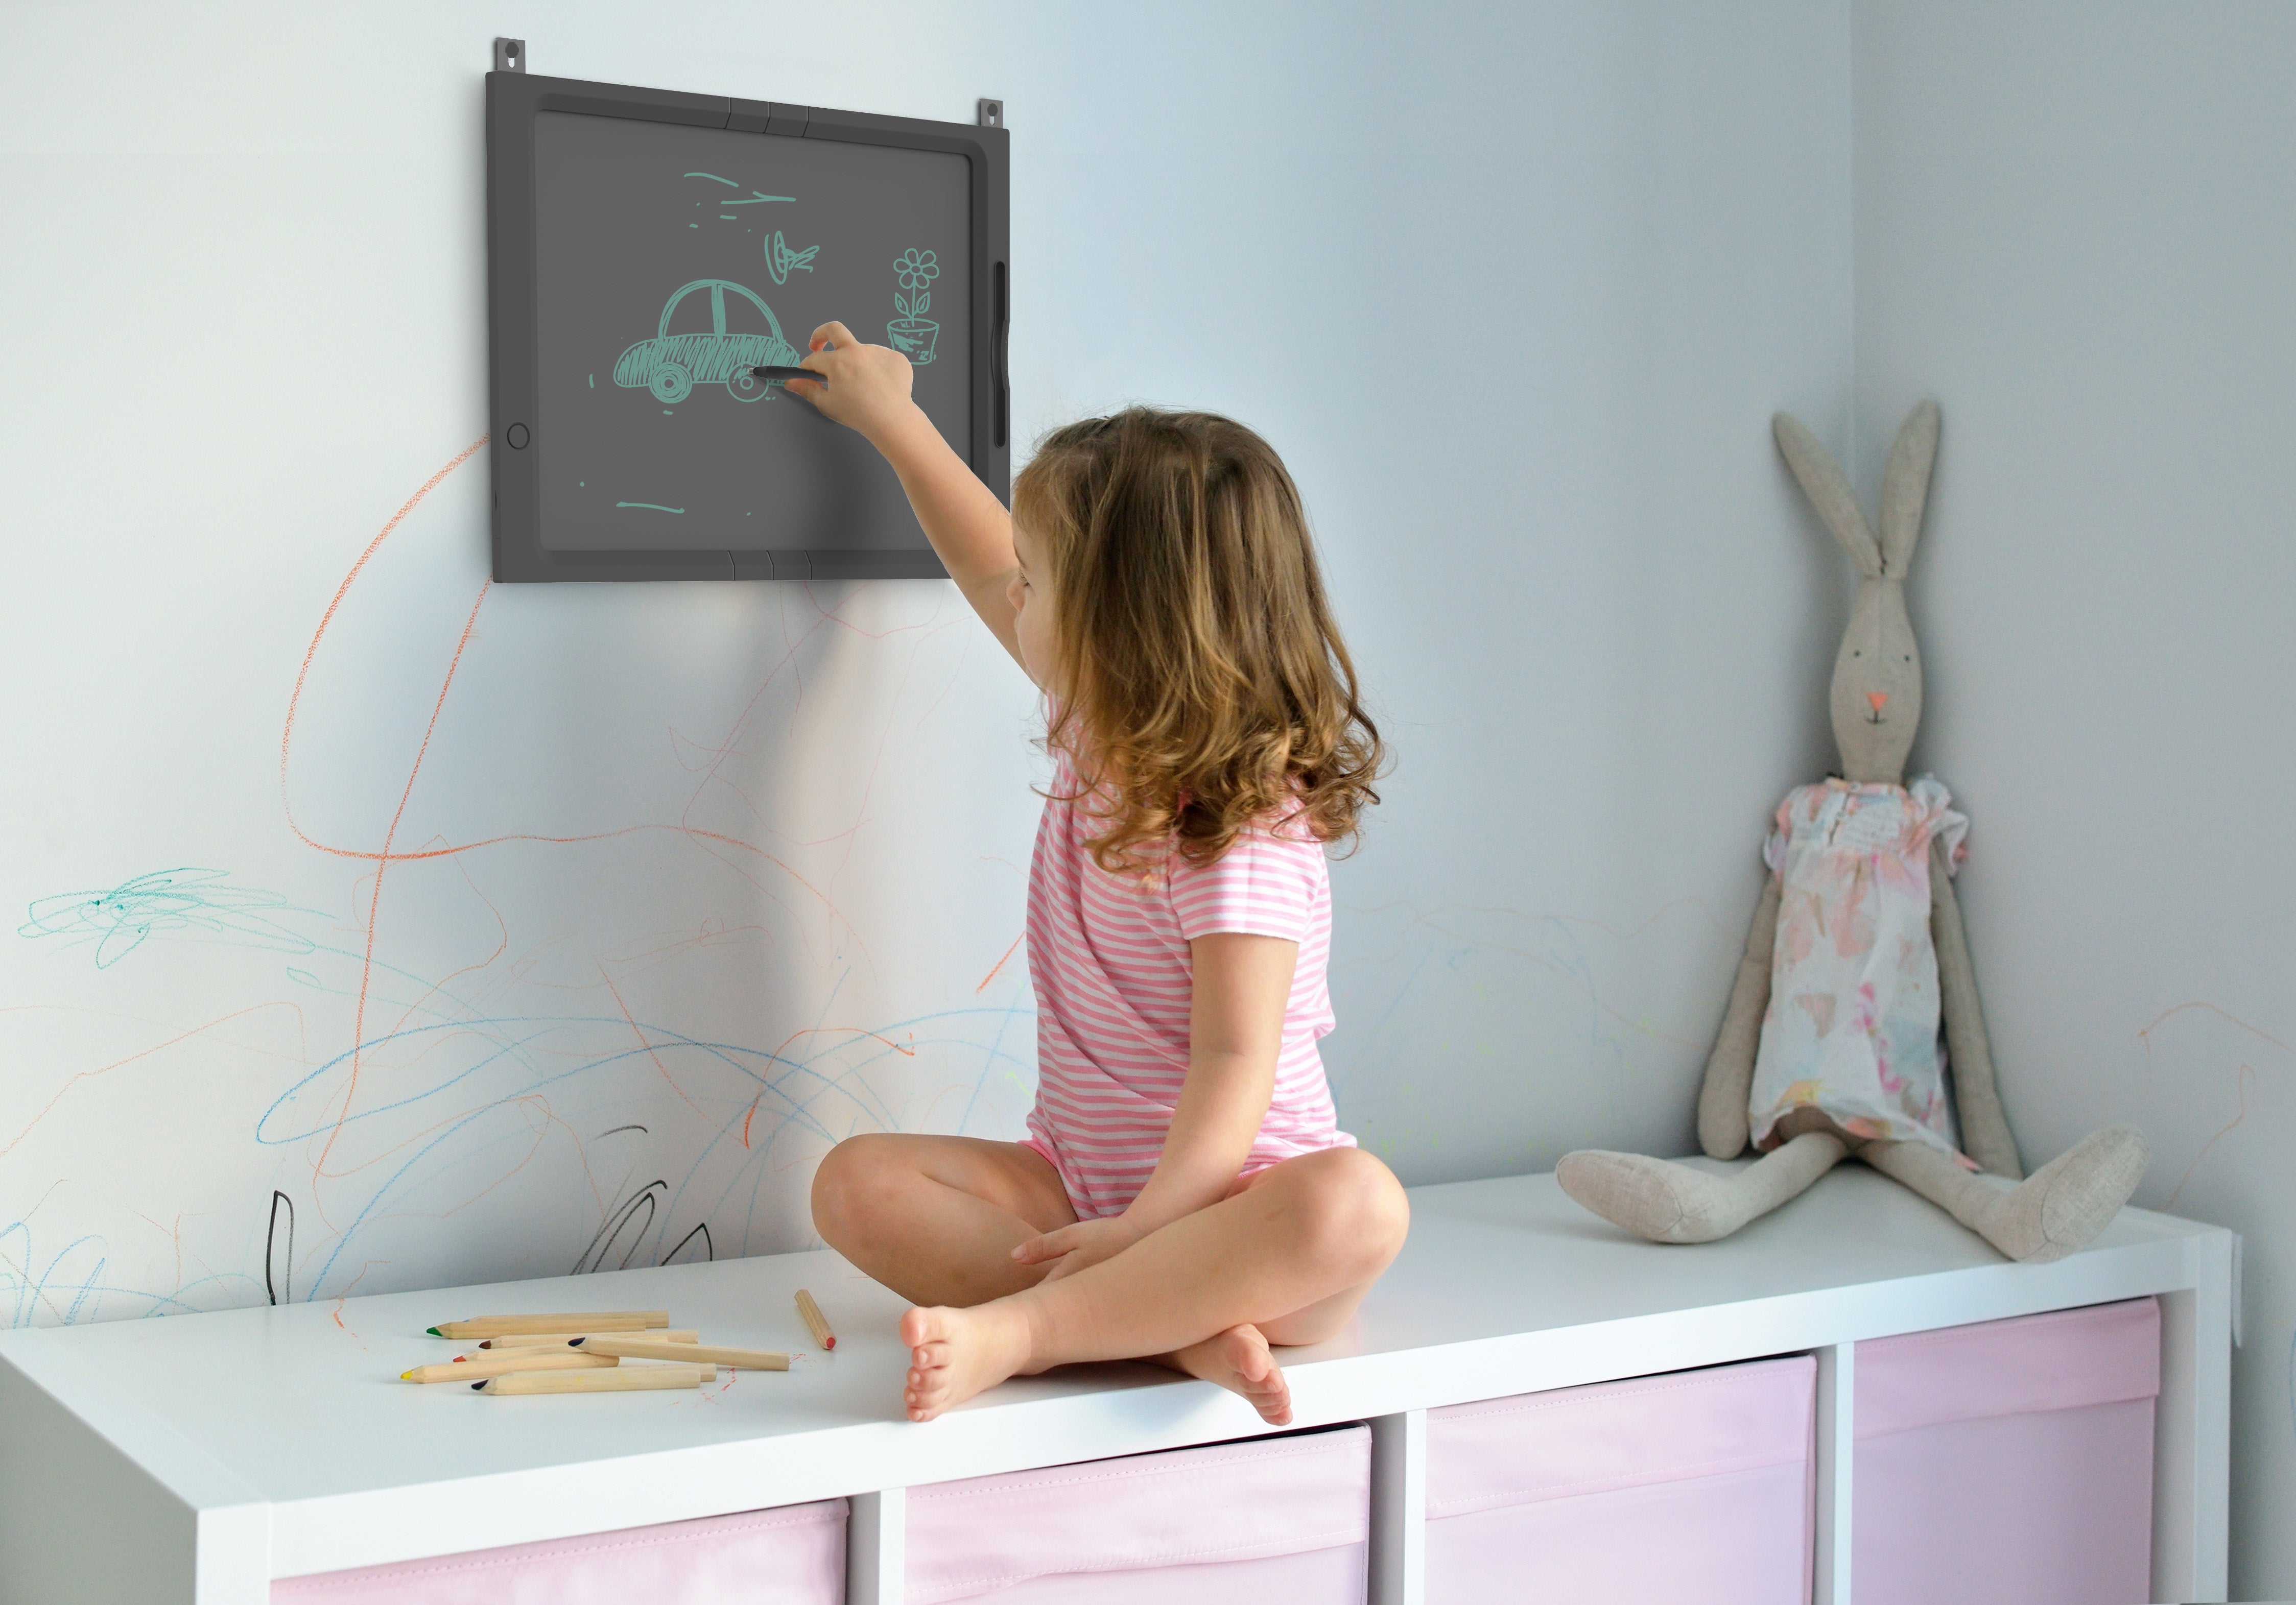 A Fun, Inexpensive Way to Keep Your Kids Occupied: The Sketch Board